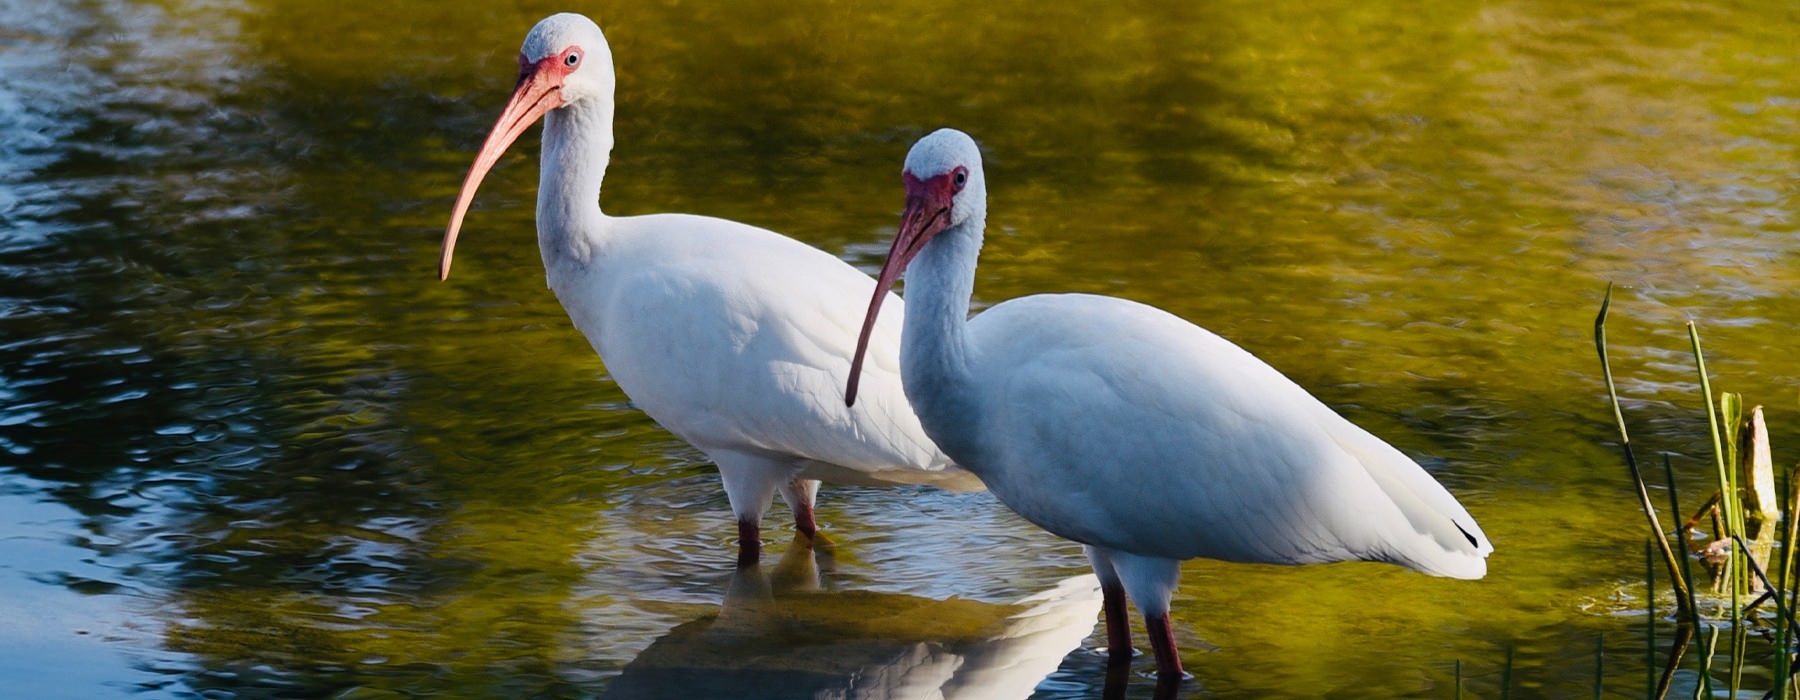 Two storks wading in the water 